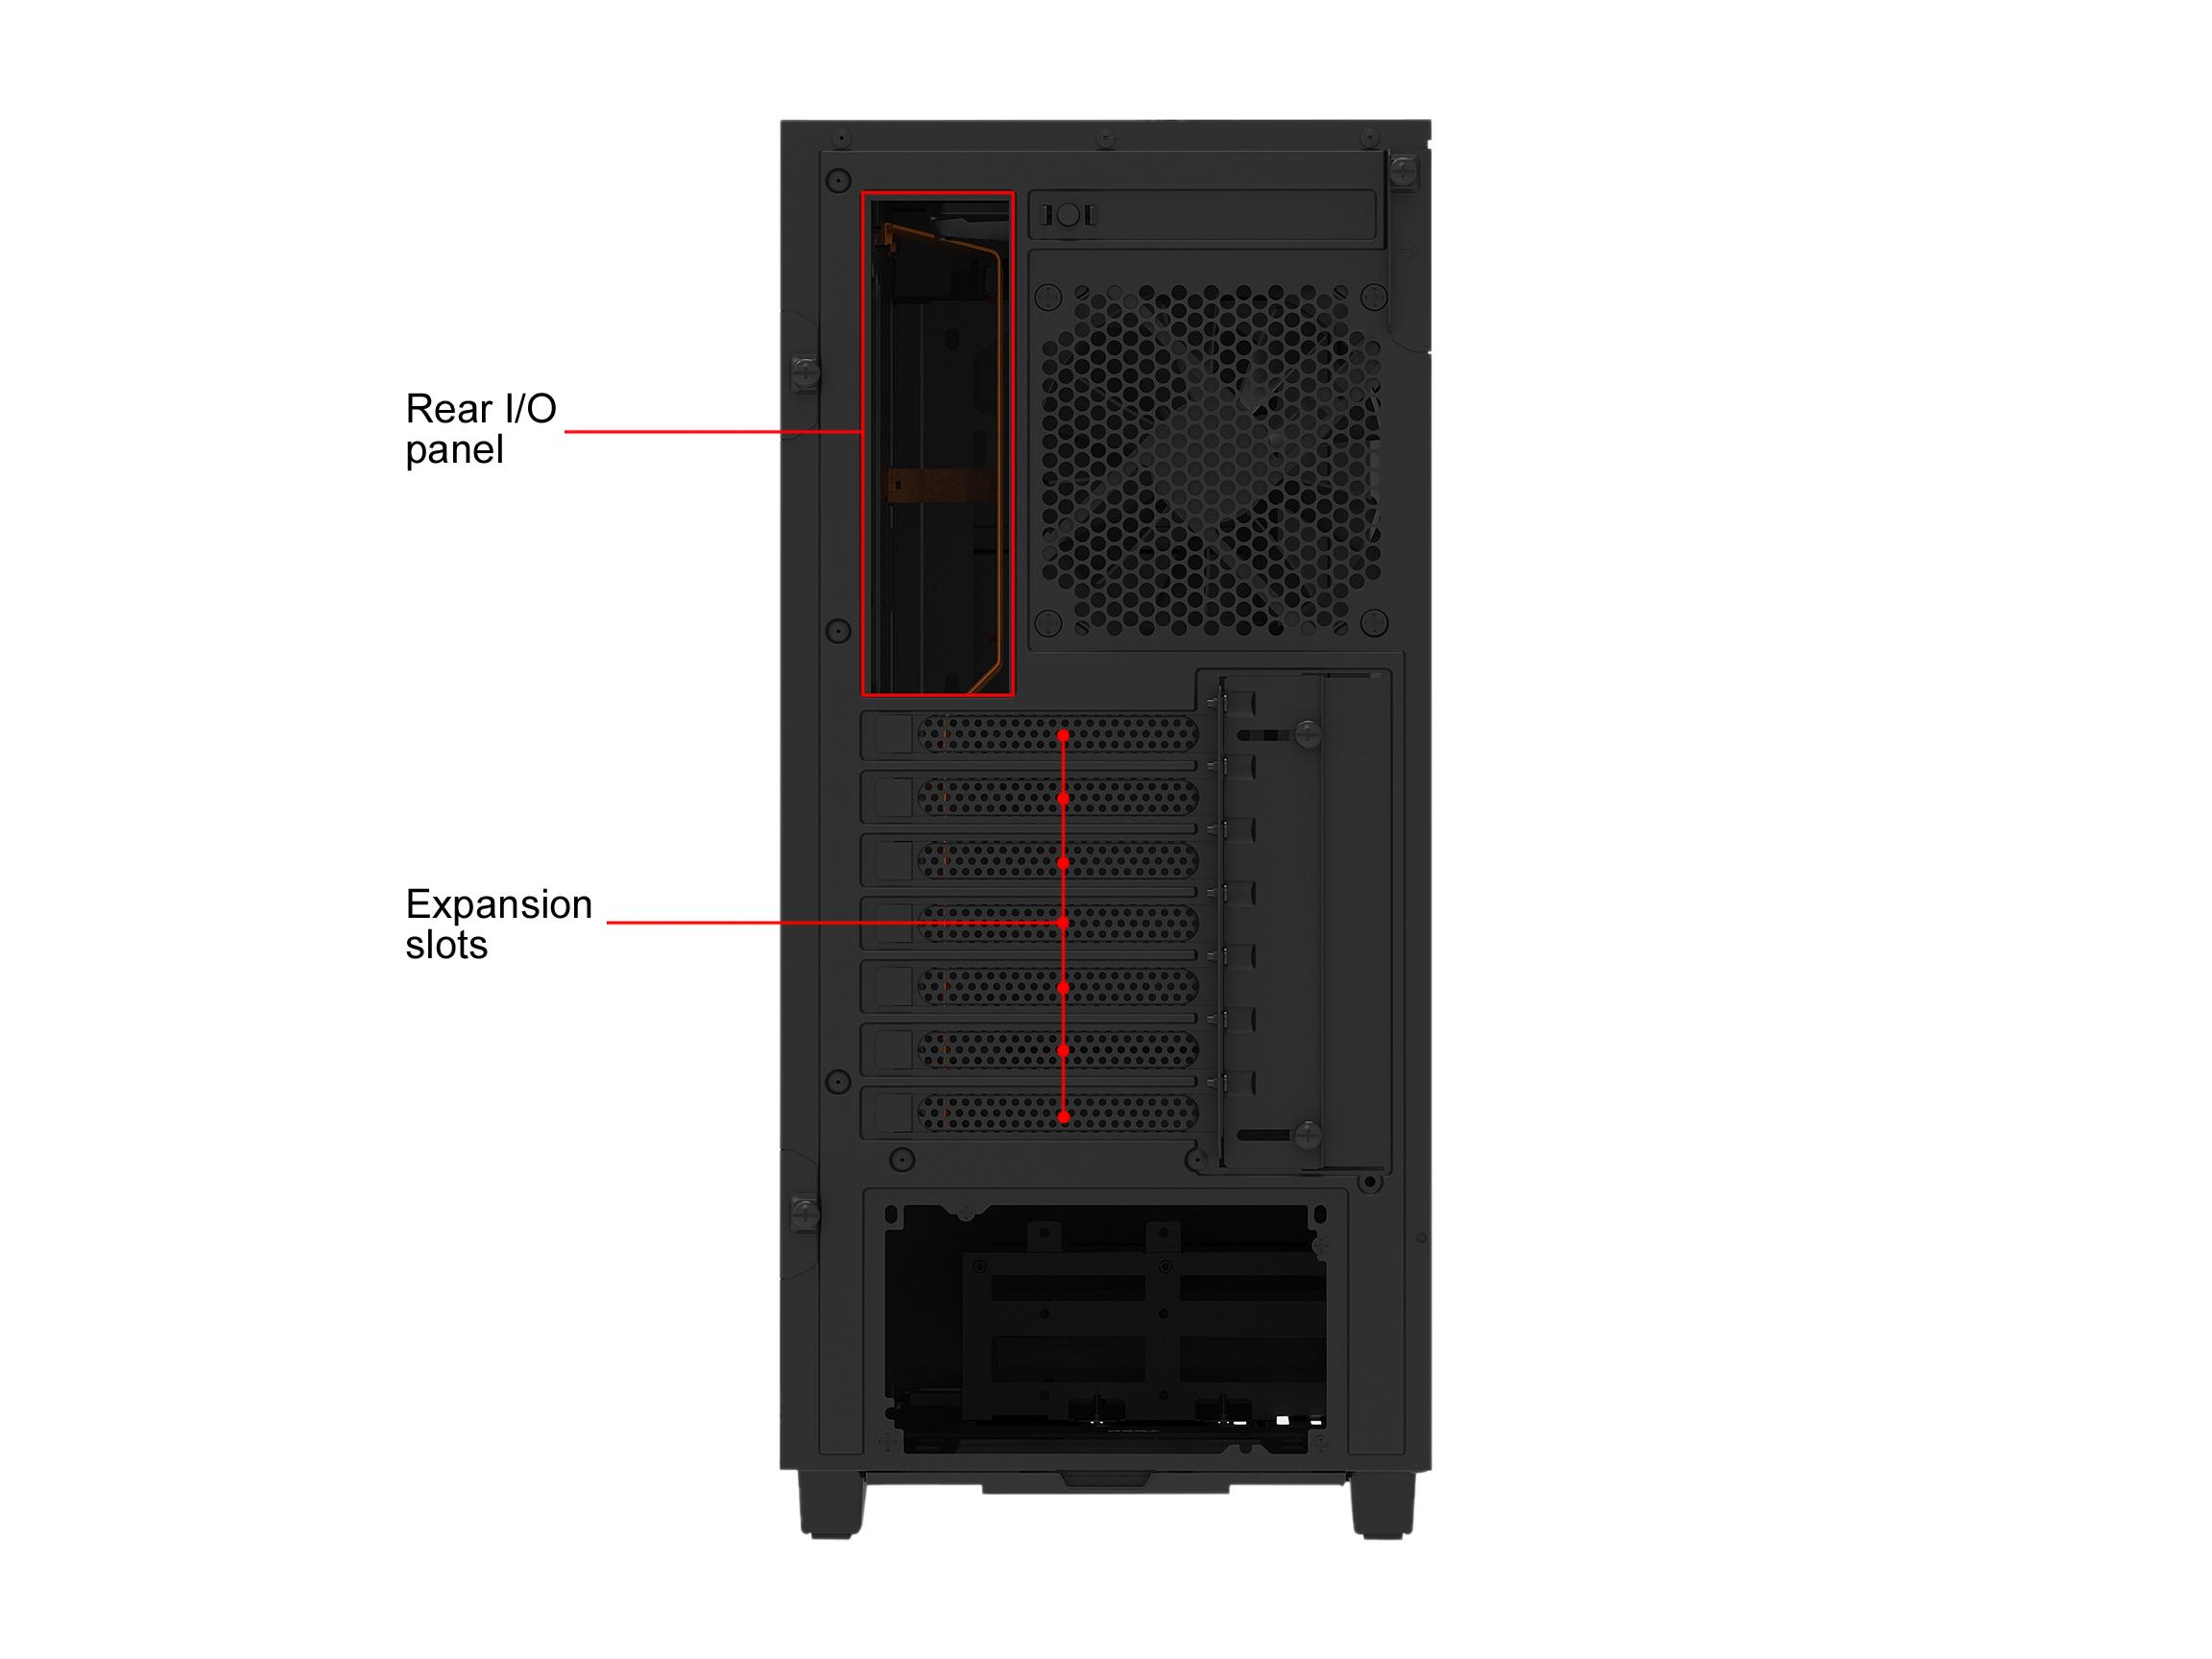 NZXT H500 OVERWATCH ATX MID TOWER CHASSIS